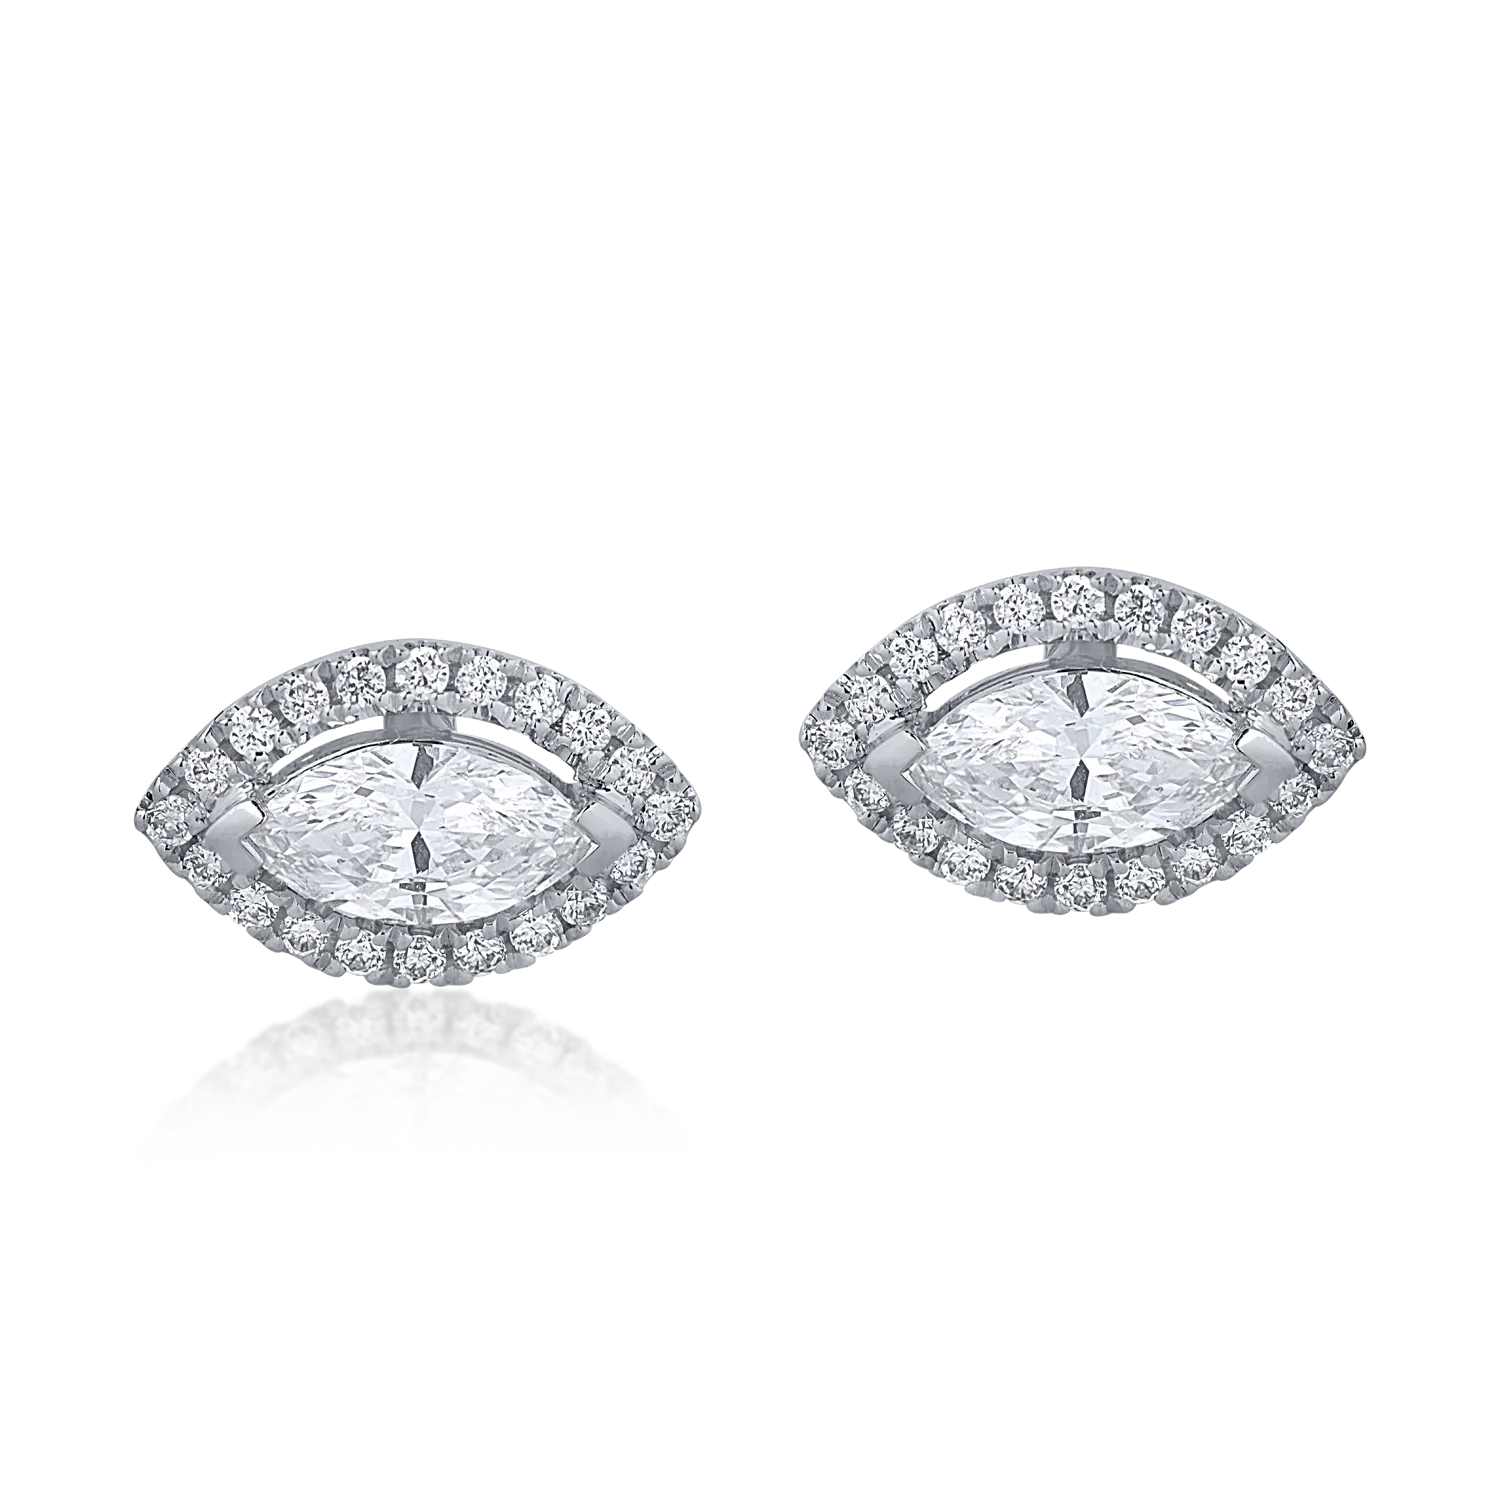 White gold earrings with 0.68ct diamonds